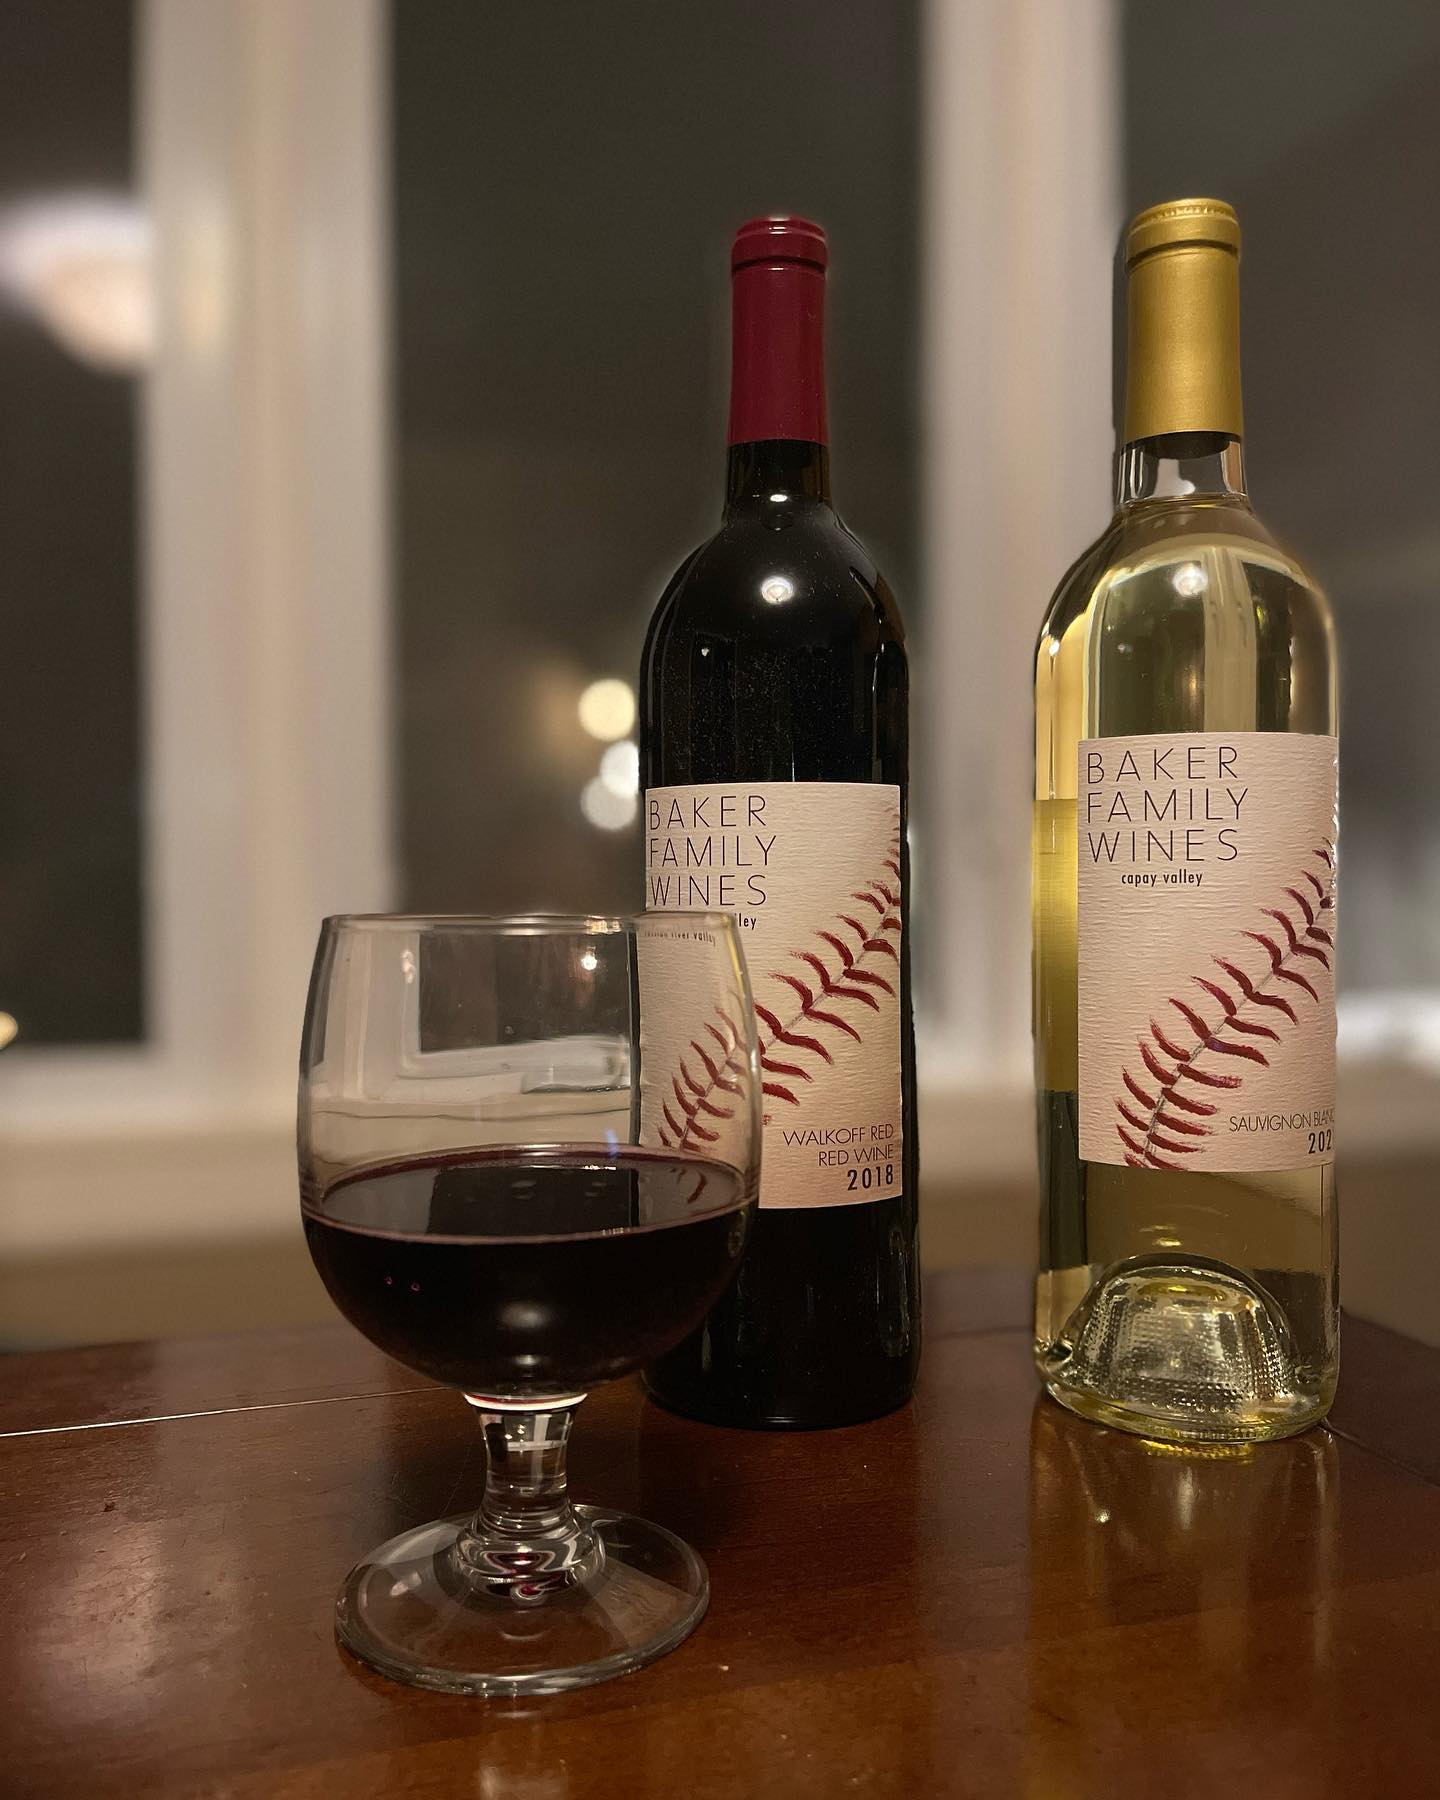 We must celebrate this World Series championship by having wine made by the man himself, Dusty Baker, and our guy Chik!  Congratulations to Dusty, @astrosbaseball and @baker_family_wines! 

@ambzatlas 😁